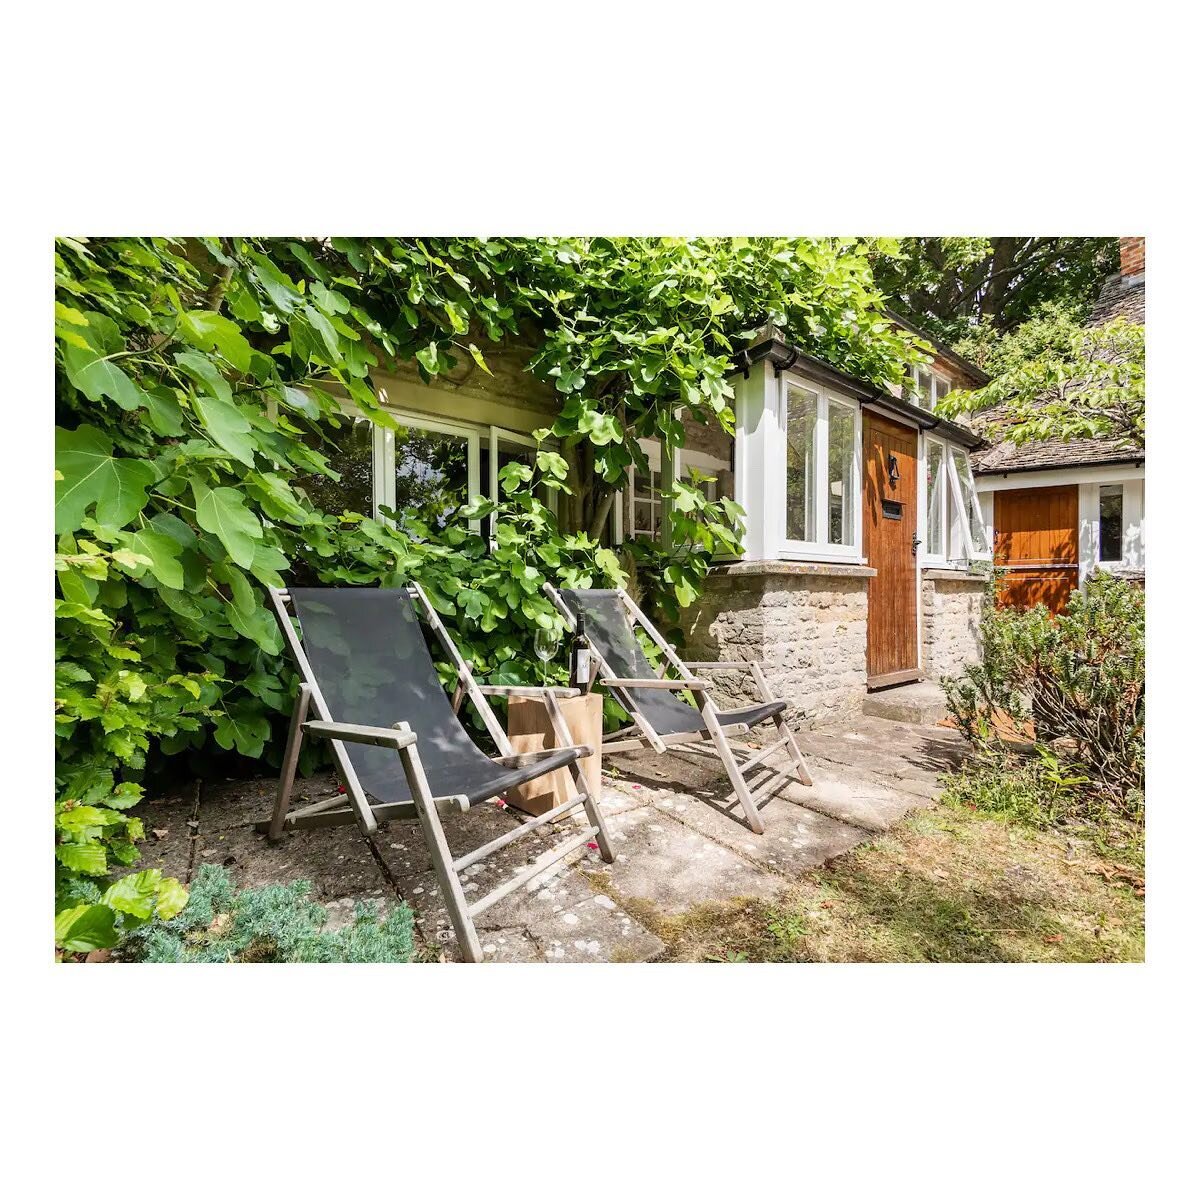 Pull up a pew and enjoy a glass of wine&hellip; a distant summer memory at the cottage #cotswoldcottage #cotswoldcottages #holidaycottage #cotswolds #cotswoldstyle #thecotswolds #cottagestyle #garden #holiday #holidays #summerholidays